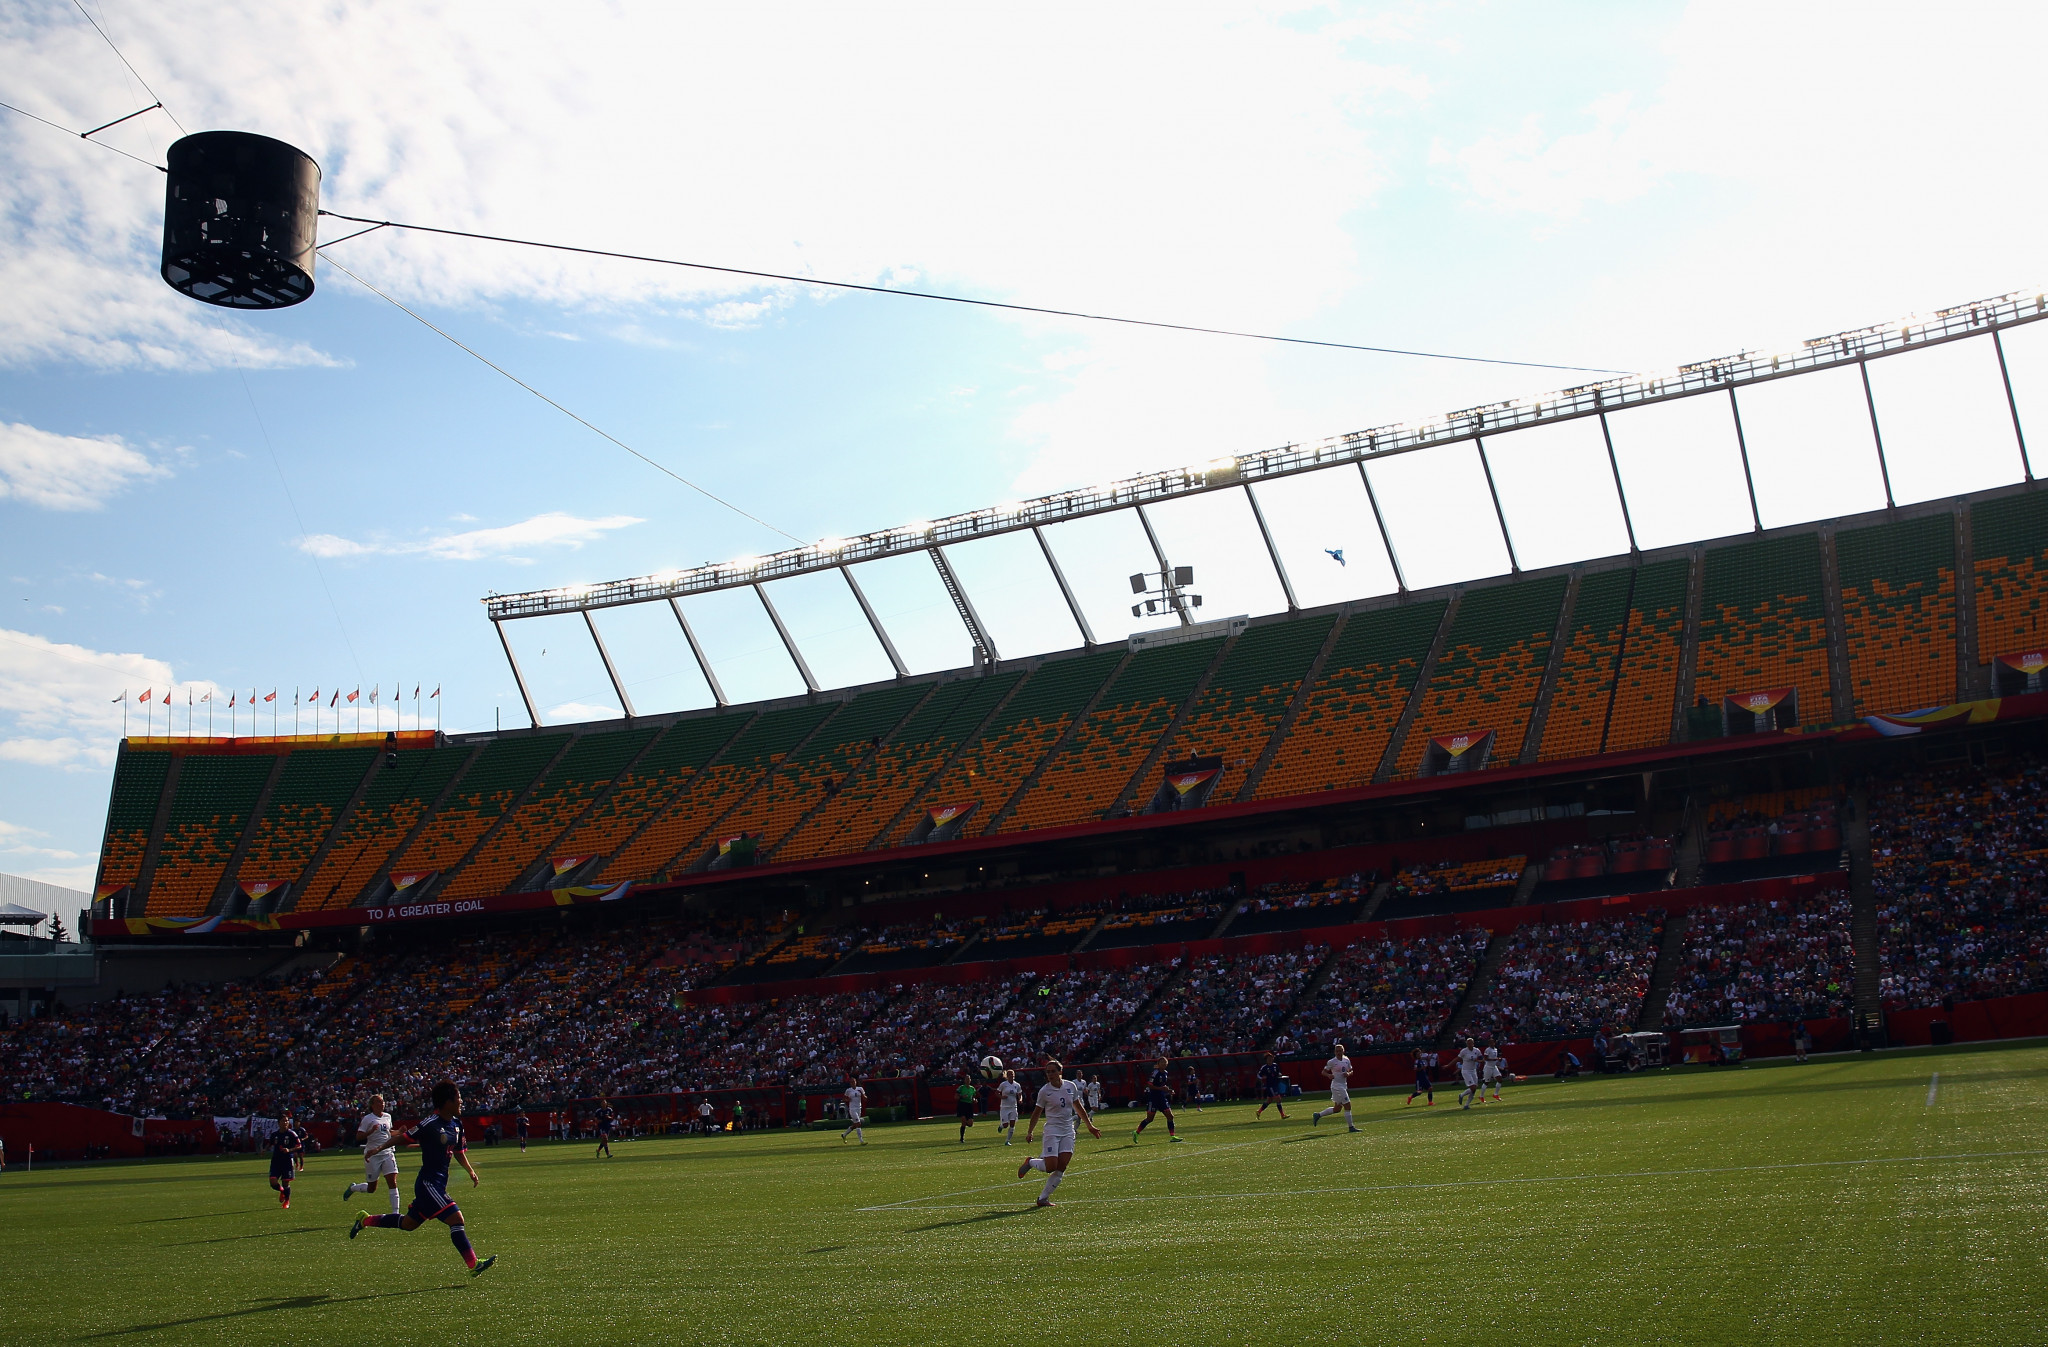 Commonwealth Stadium fronted Edmonton's bid but may miss out on hosting rights for the 2026 FIFA World Cup ©Getty Images